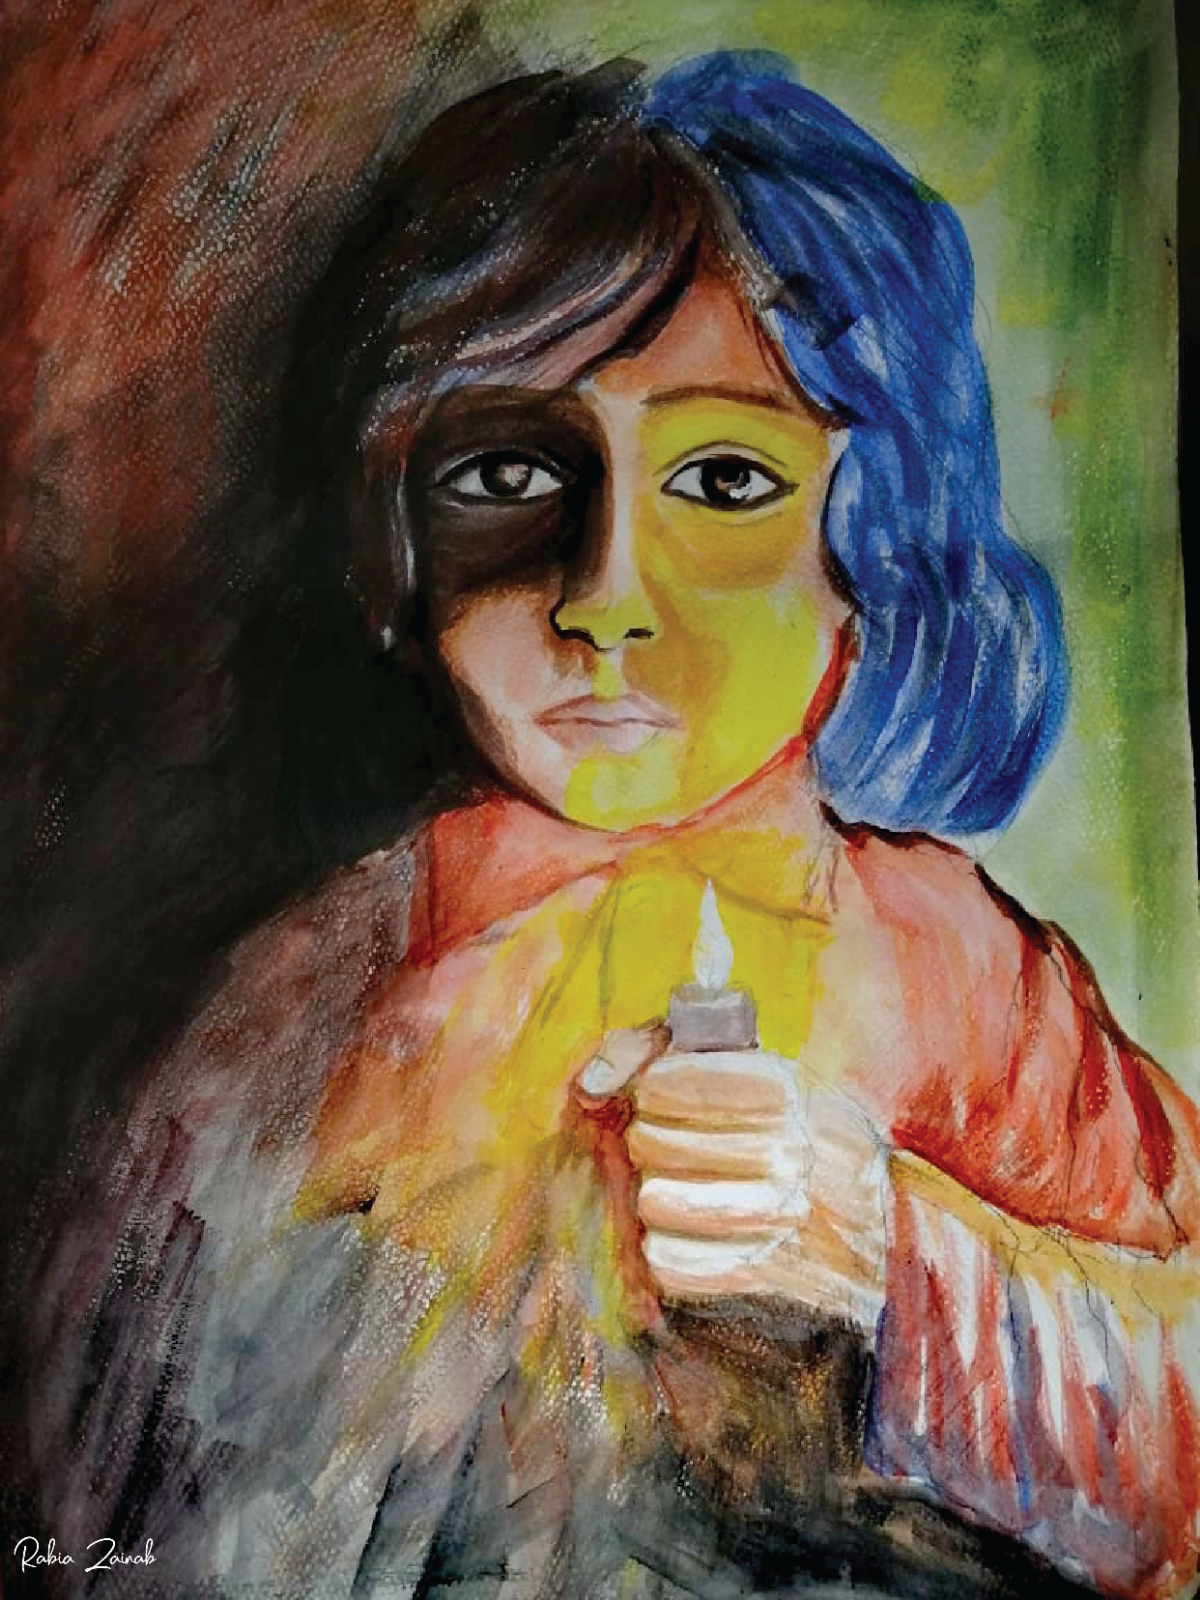 Kashmir Solidarity Day : Young Artists Paint Life in Kashmir With Hope for Peace